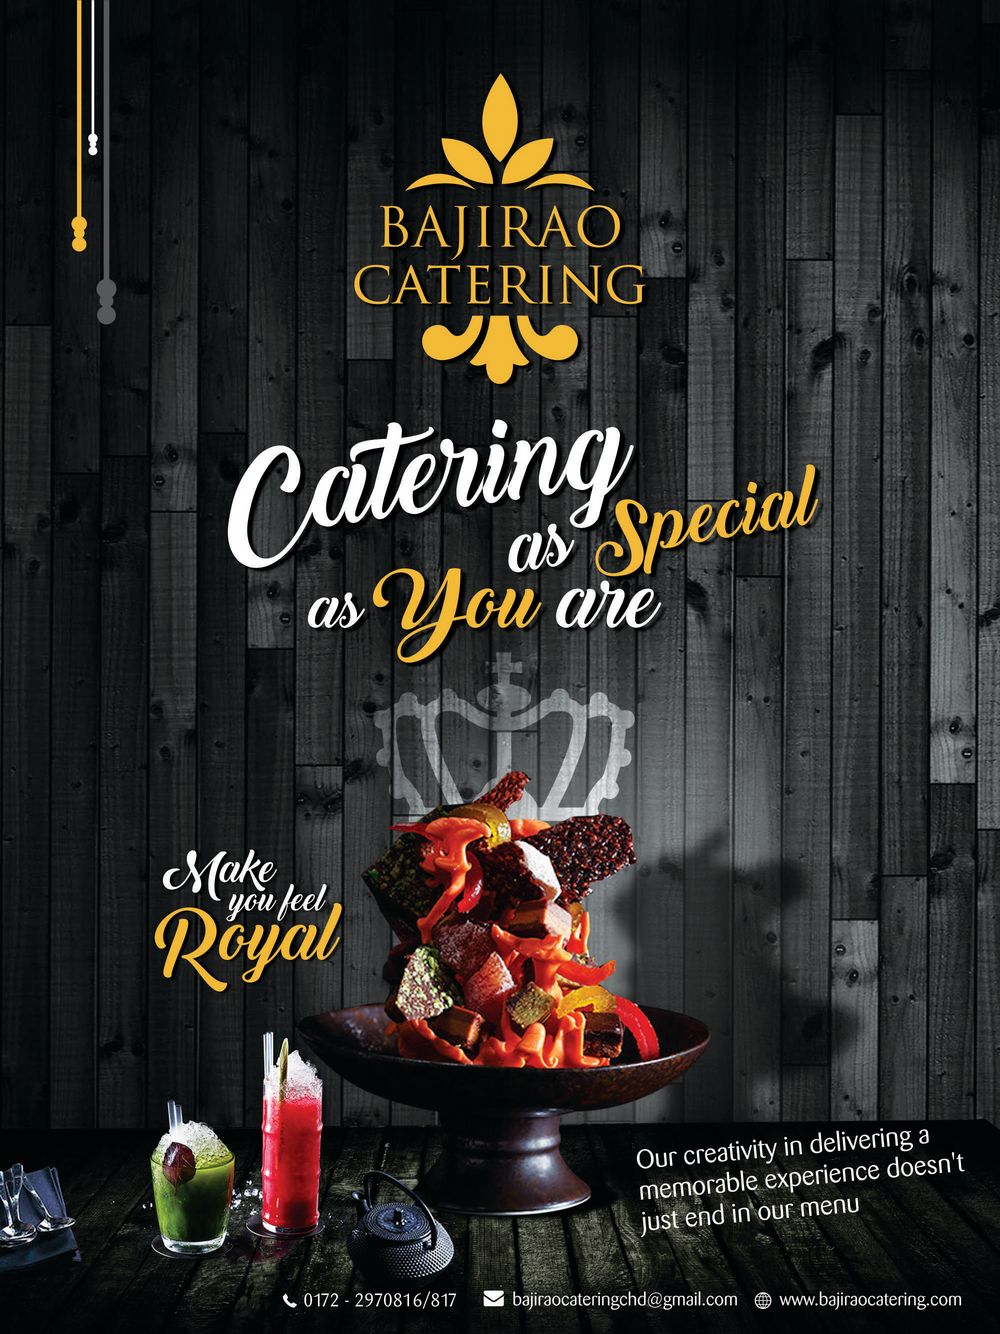 Photo By Bajirao Catering - Catering Services